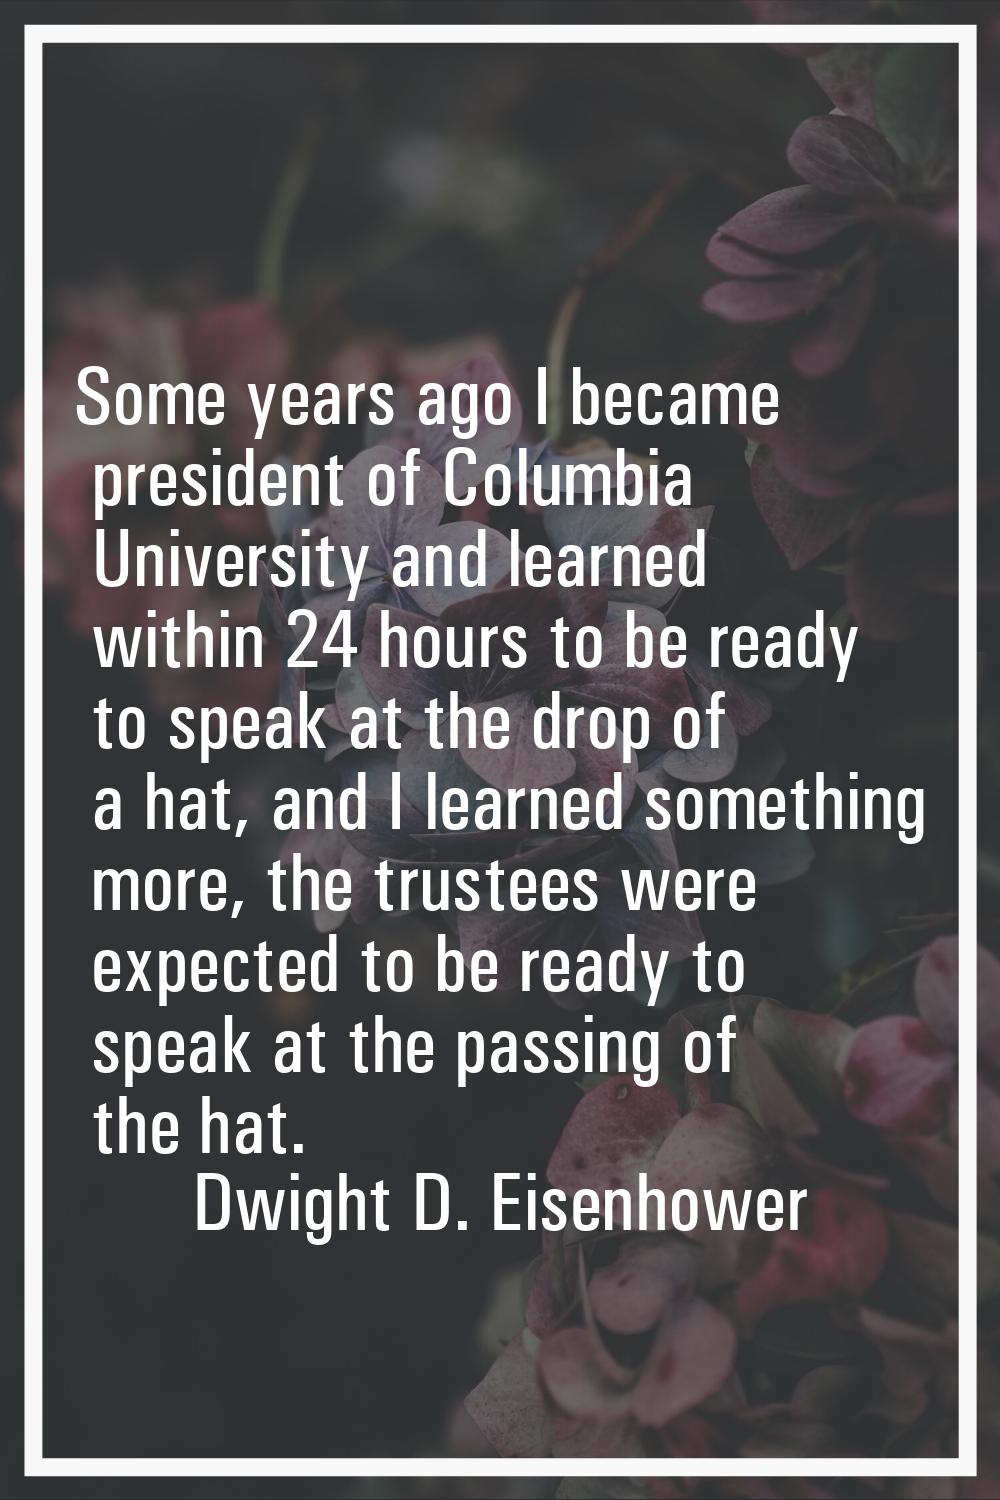 Some years ago I became president of Columbia University and learned within 24 hours to be ready to